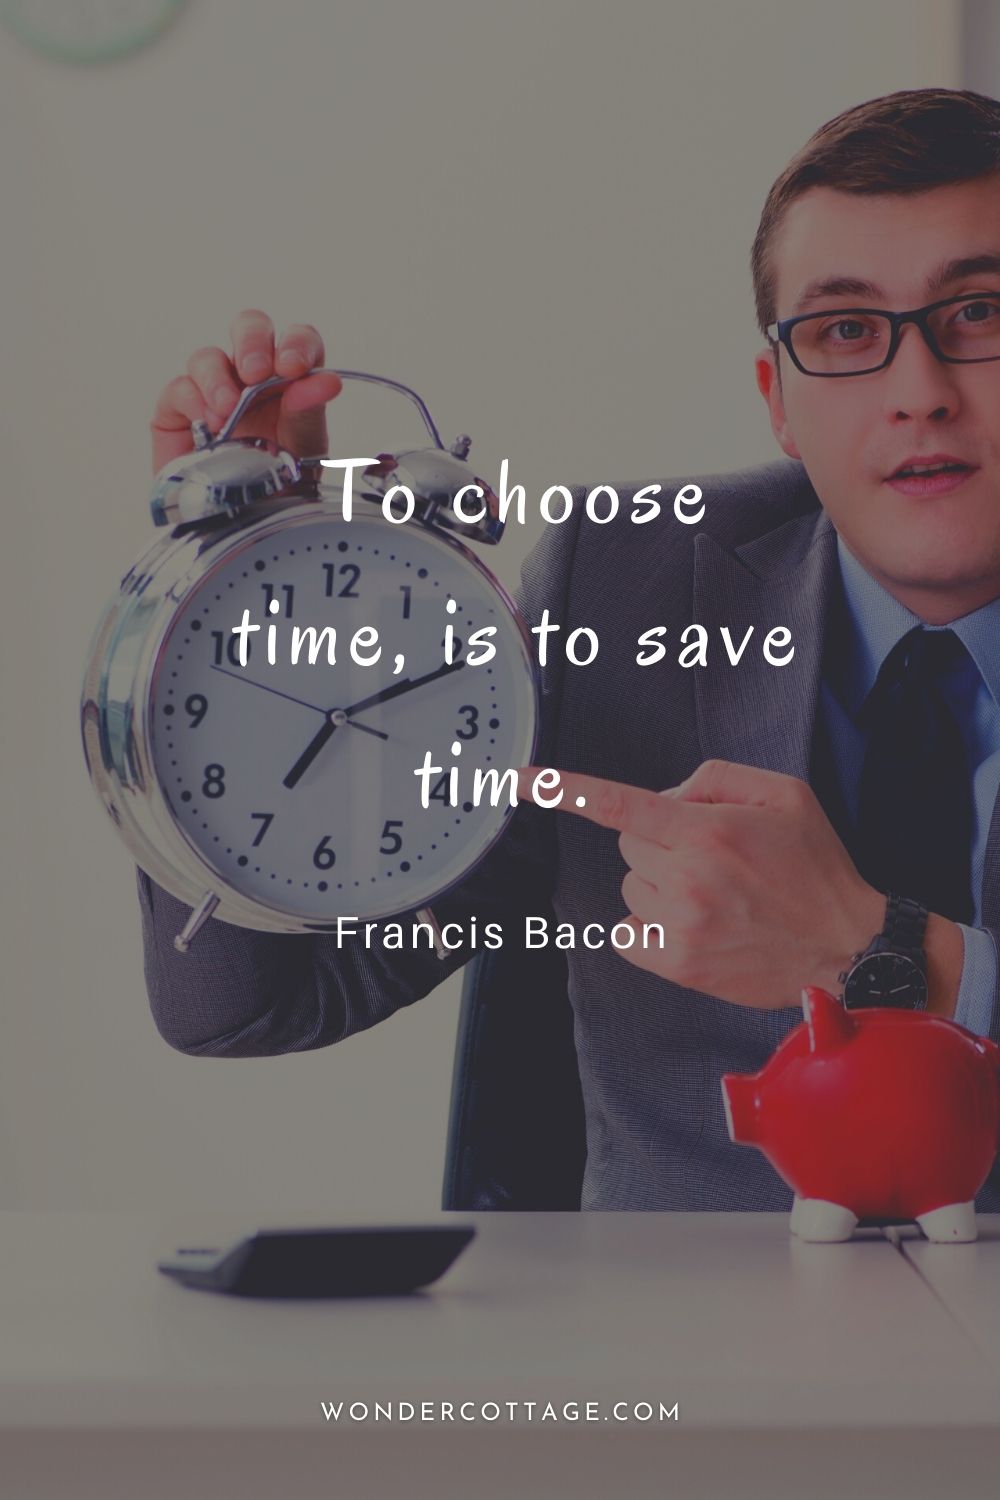 To choose time, is to save time.  Francis Bacon